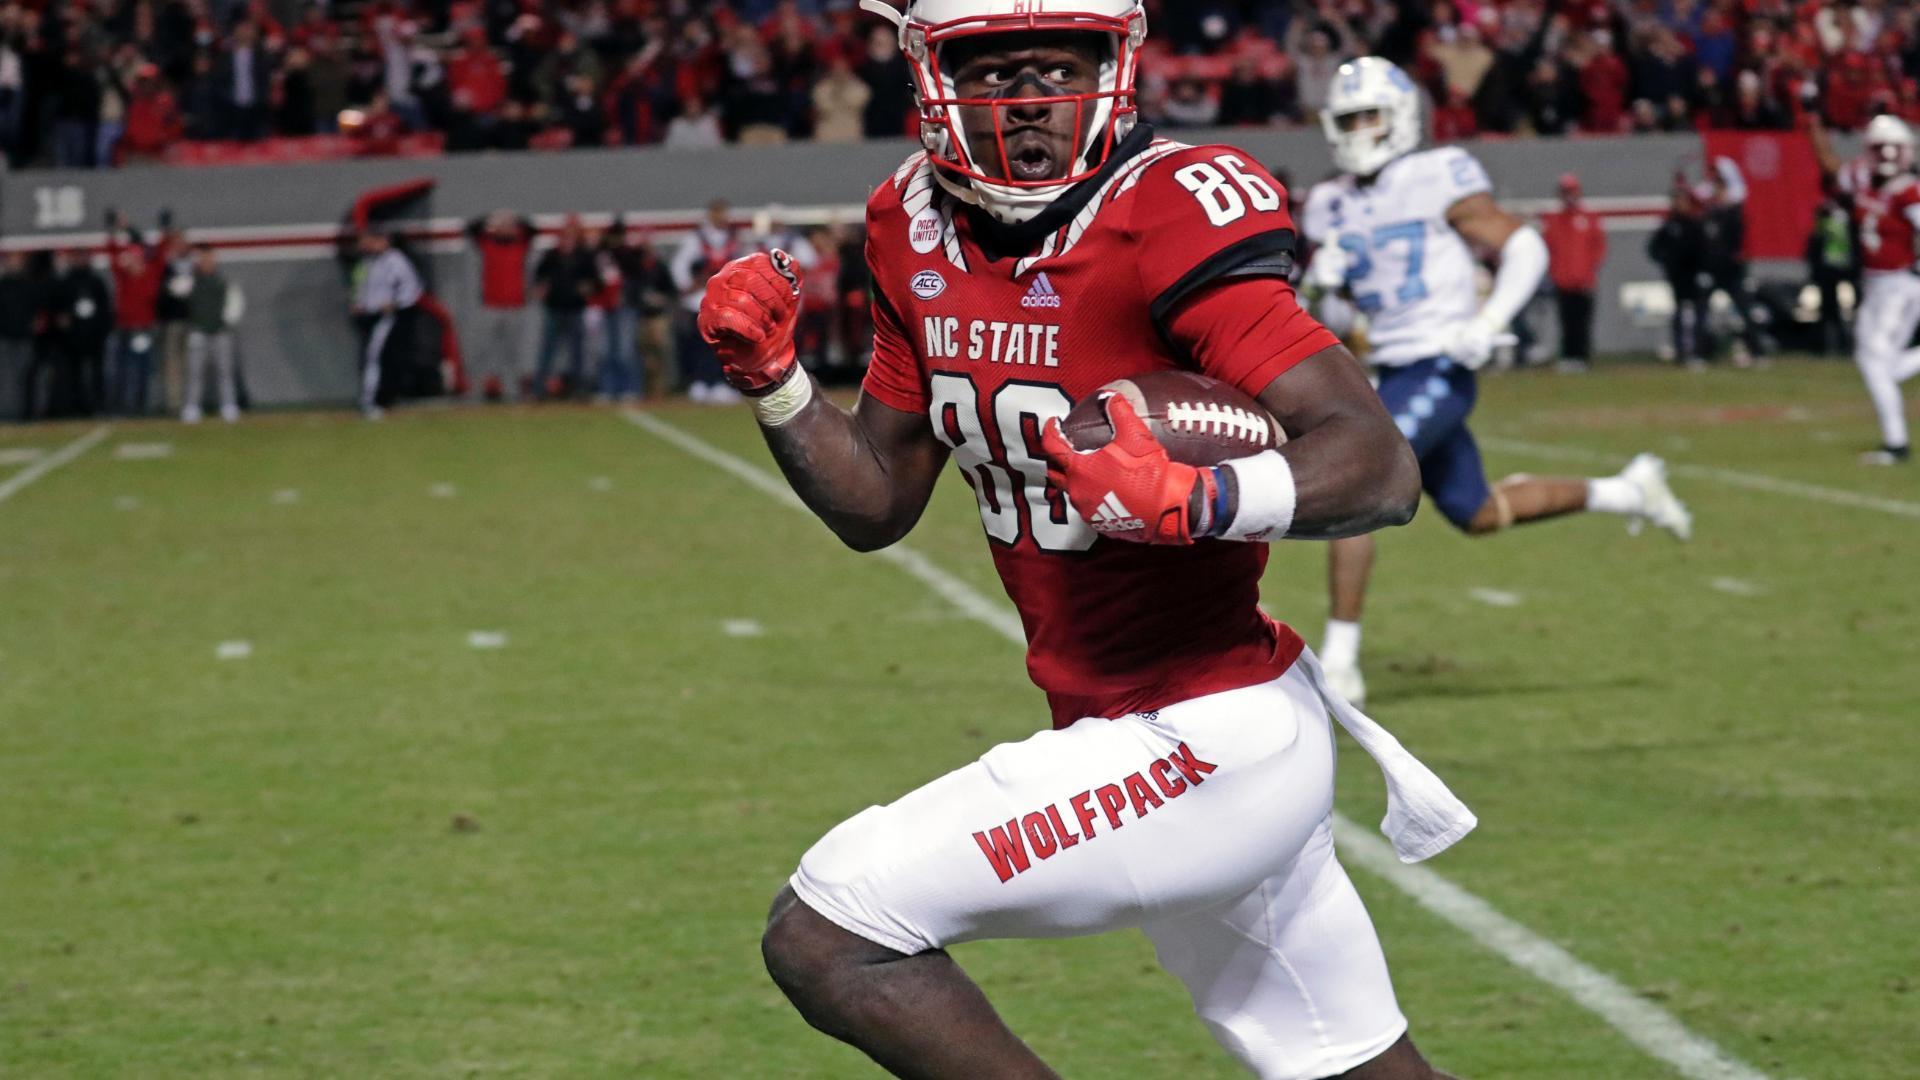 NC State completes classic comeback over UNC with 2 TDs in 26 seconds